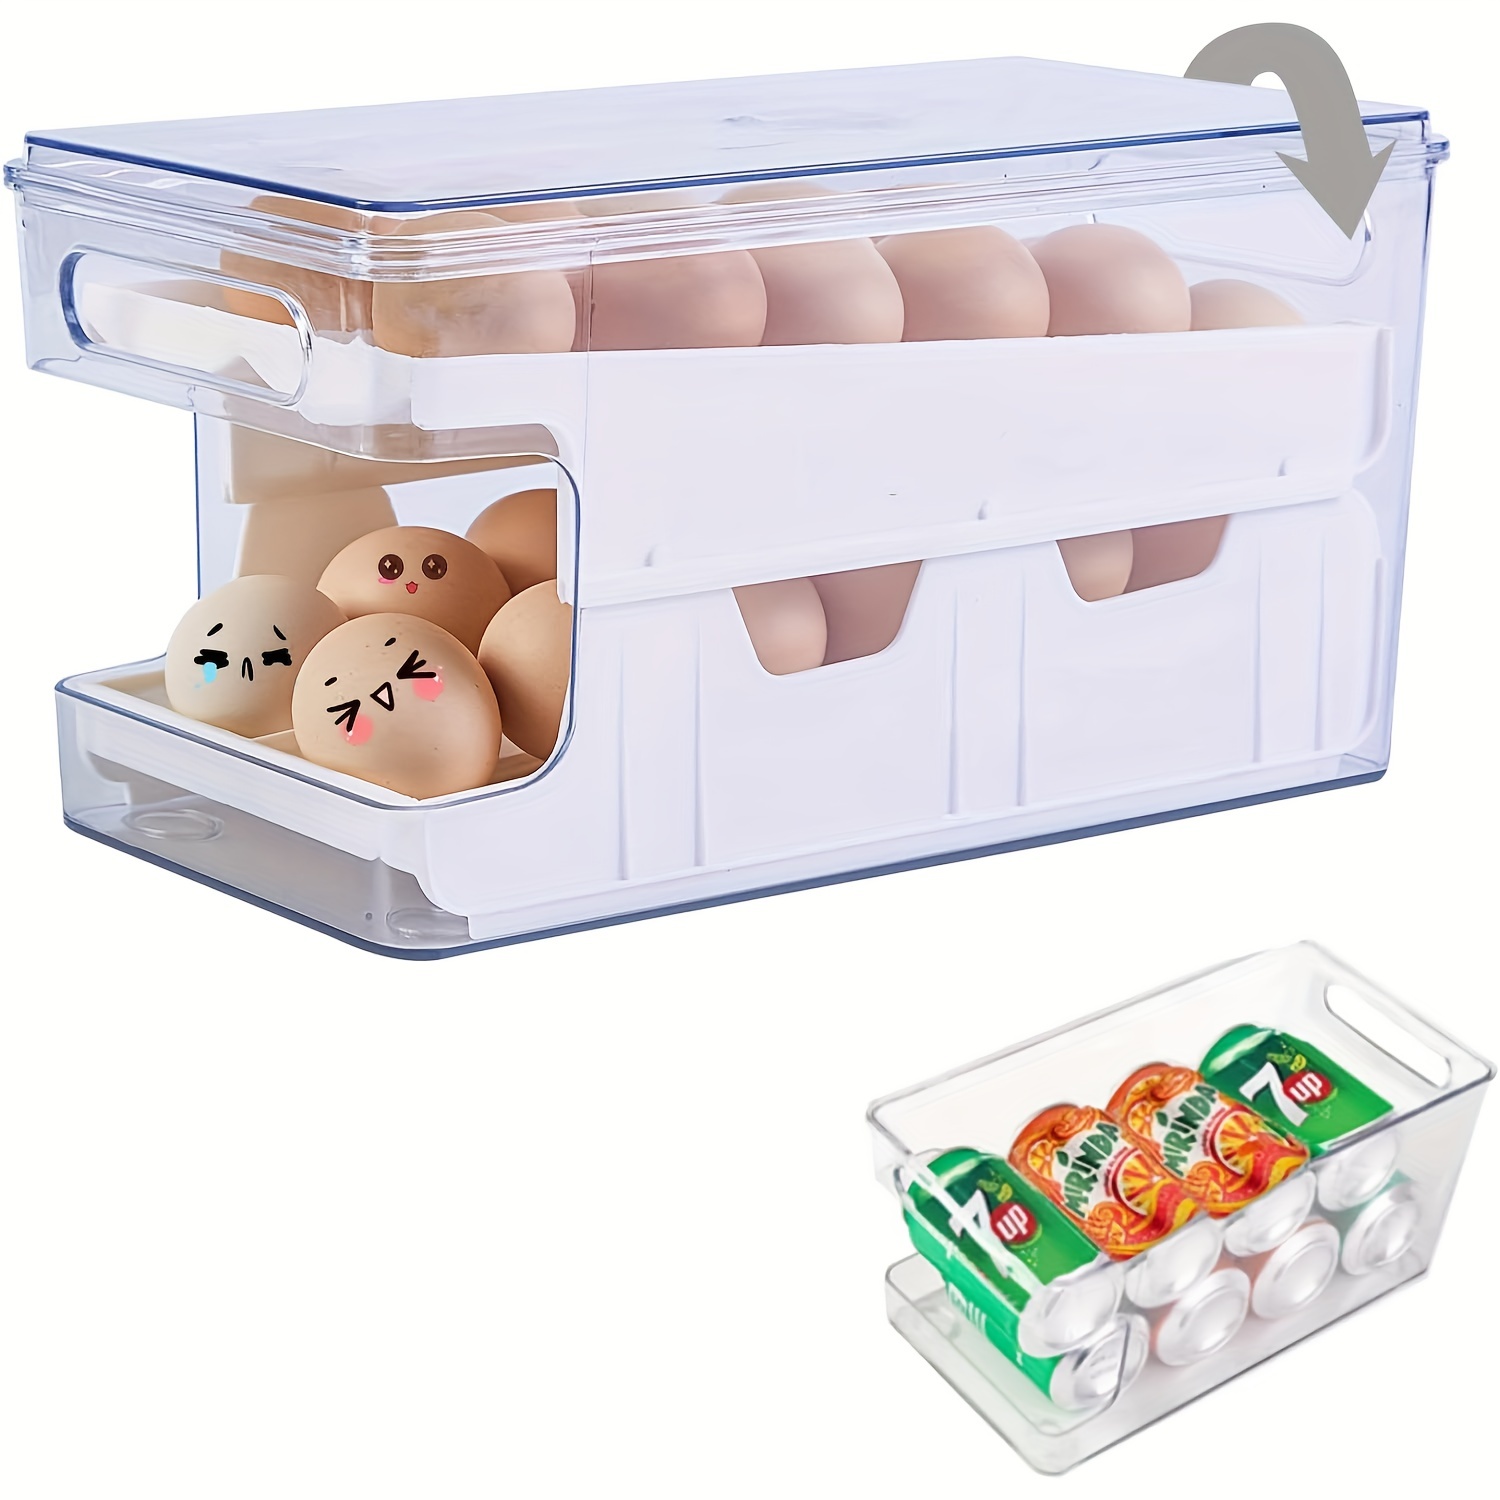 Egg Holder for Refrigerator and Countertop - BPA Free.This double-layer,  clear rolling egg storage container with lids for the refrigerator has a  large capacity and can hold up to 40 eggs. 